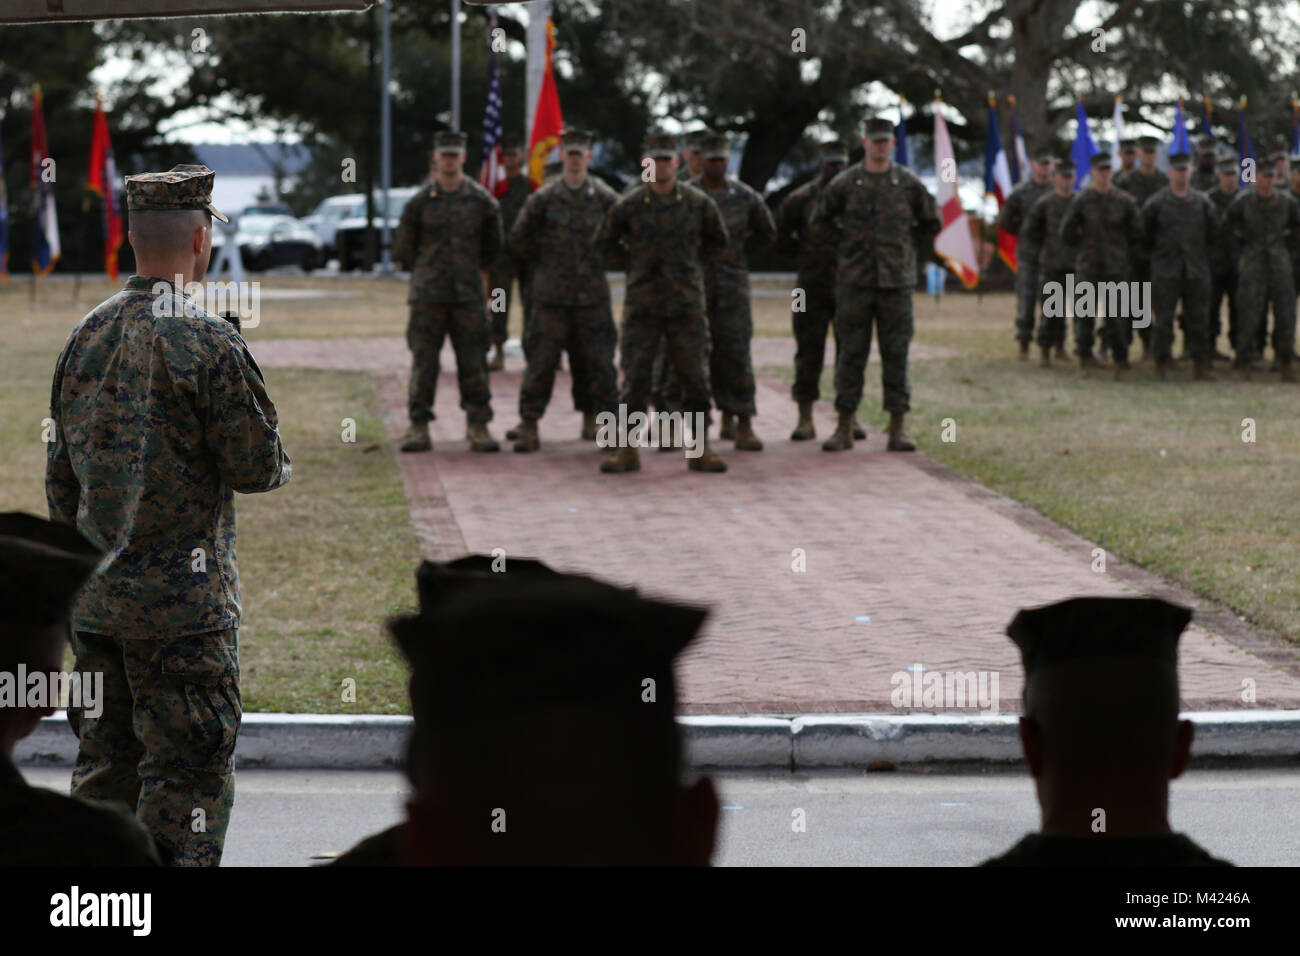 Lt. Col. Joshua Whamond addresses service members during an activation ceremony for the first ever II Marine Expeditionary Force Support Battalion at Camp Lejeune, N.C., Feb. 9, 2018. The new battalion, part of the II MEF Information Group, is designed to provide and coordinate combat-service support as well as security and administrative services to the MEF Command Element or Marine Expeditionary Brigade Command Element and MEF Information Group in order to sustain command and control of Marine Air-Ground Task Force operations. The activation of the MSB is in line with the Commandant's priori Stock Photo